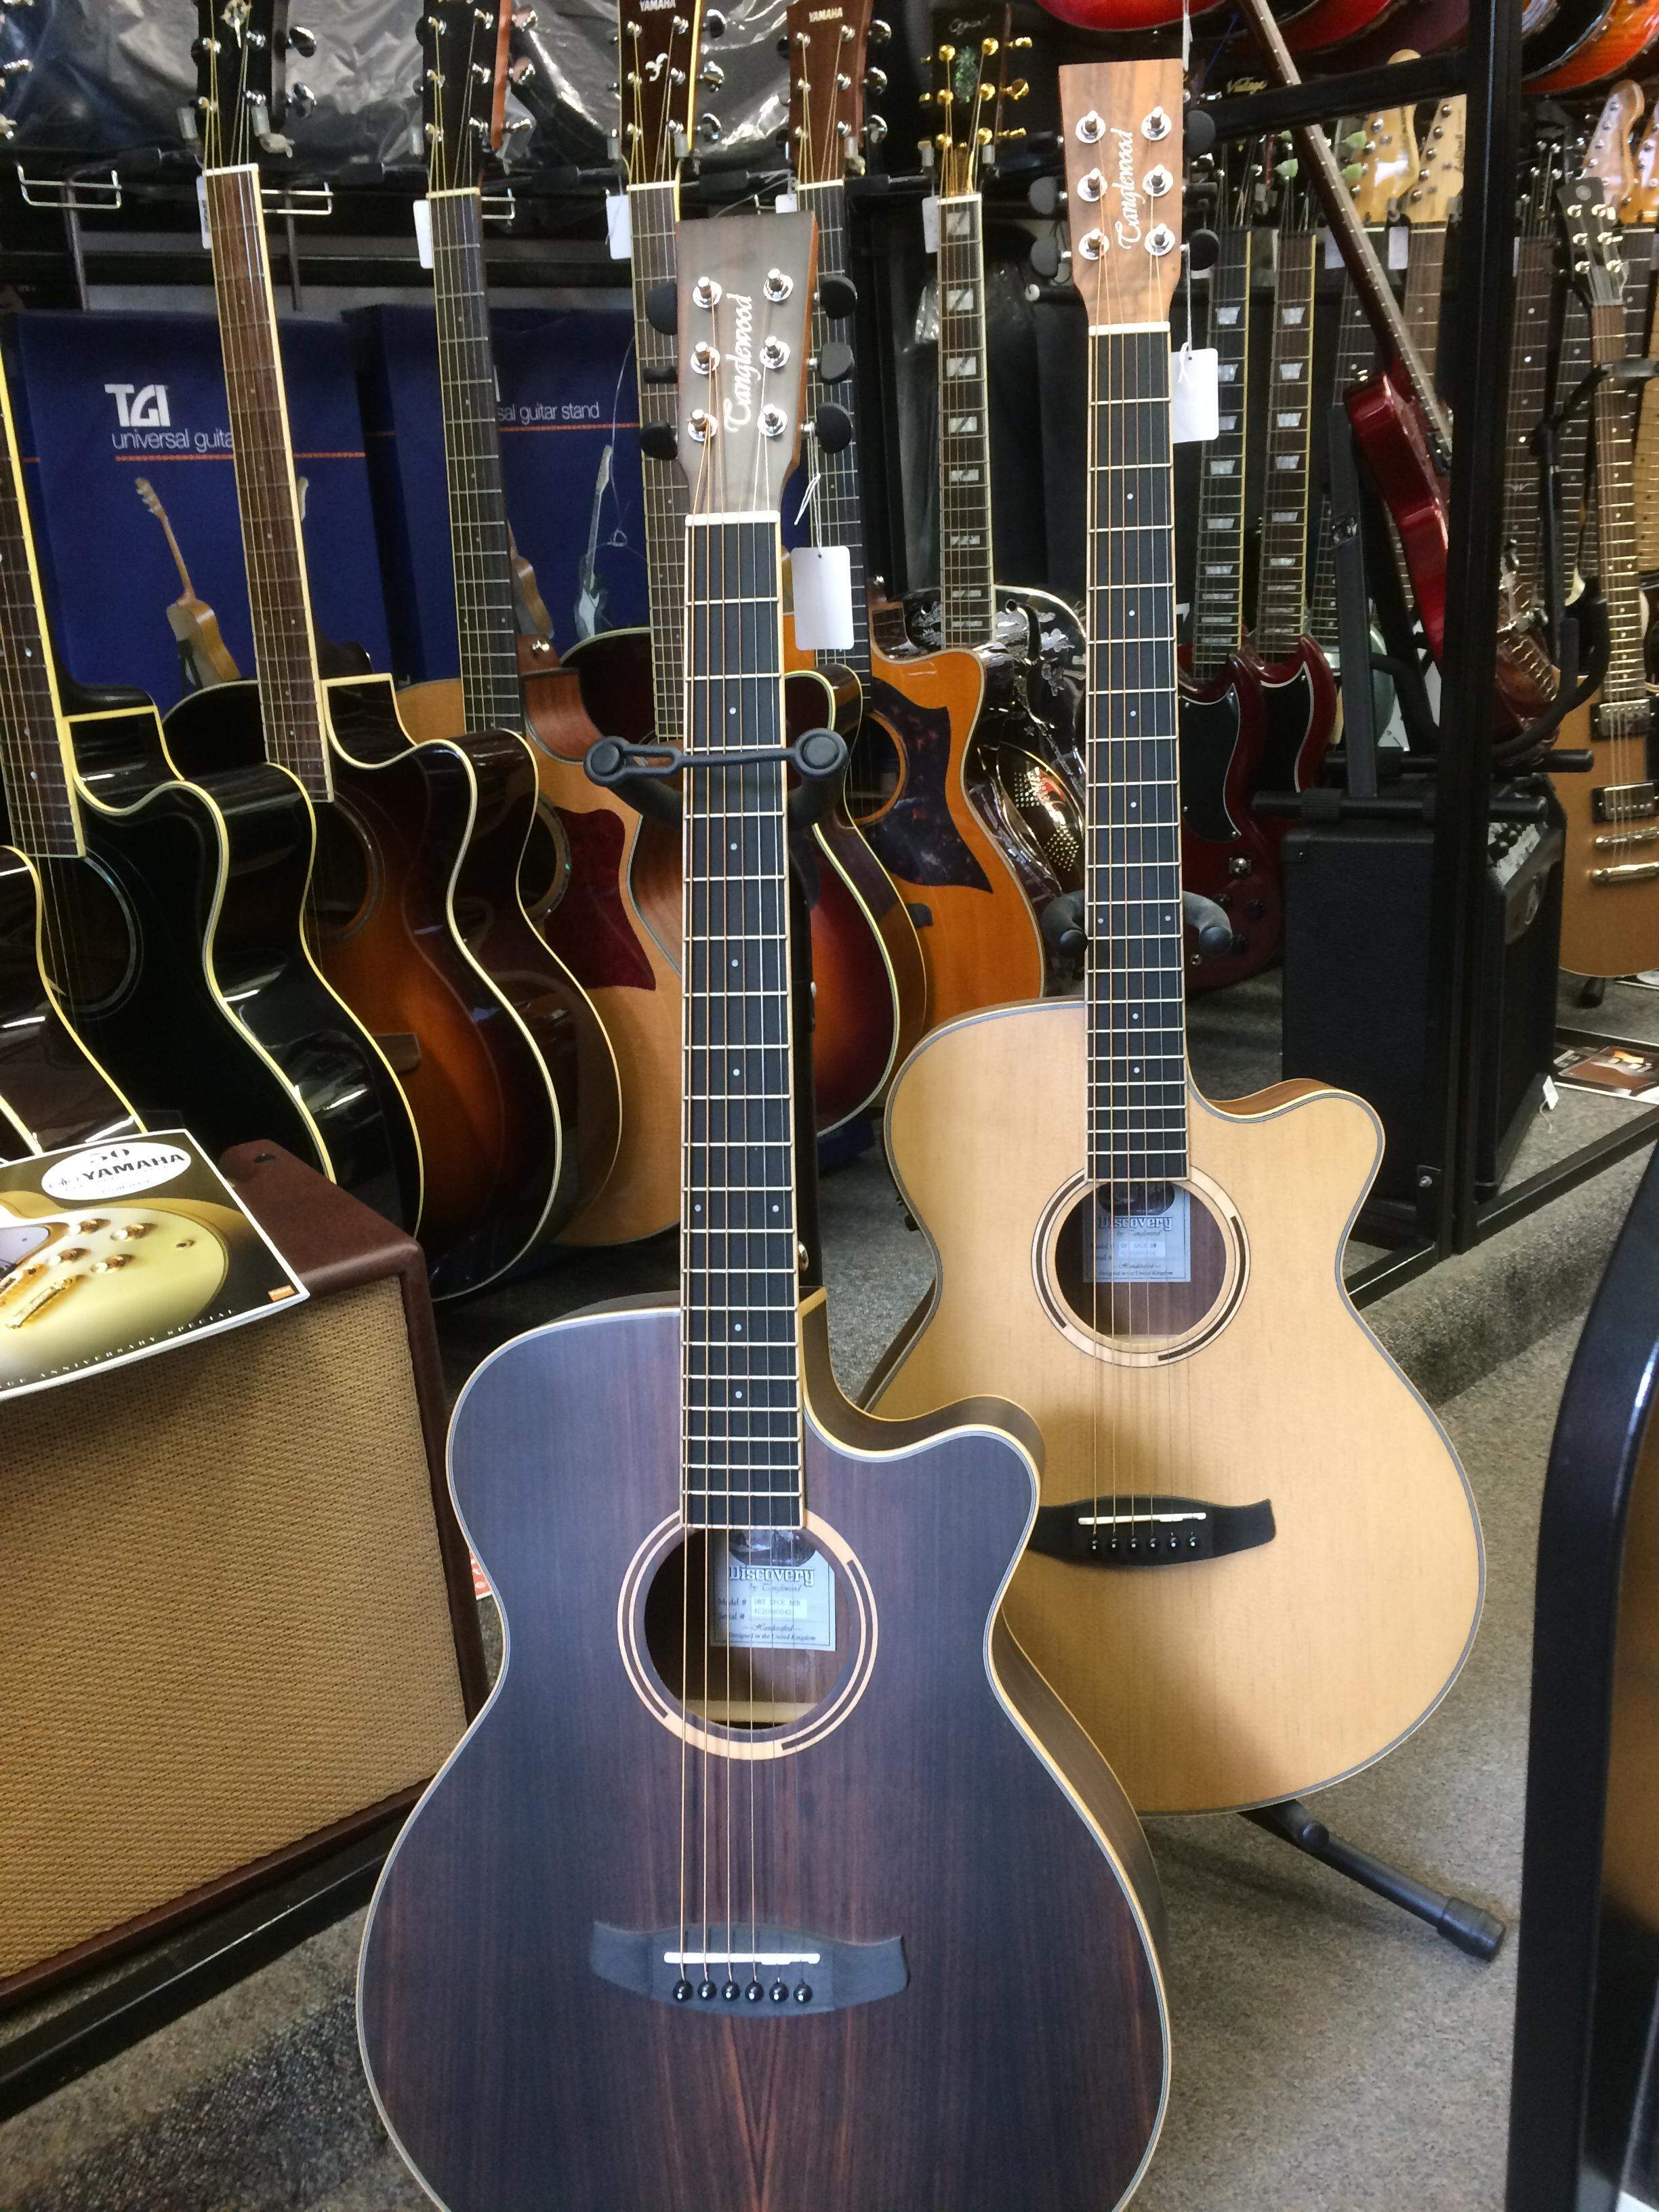 The Tanglewood Discovery guitars are great sounding affordable guitars